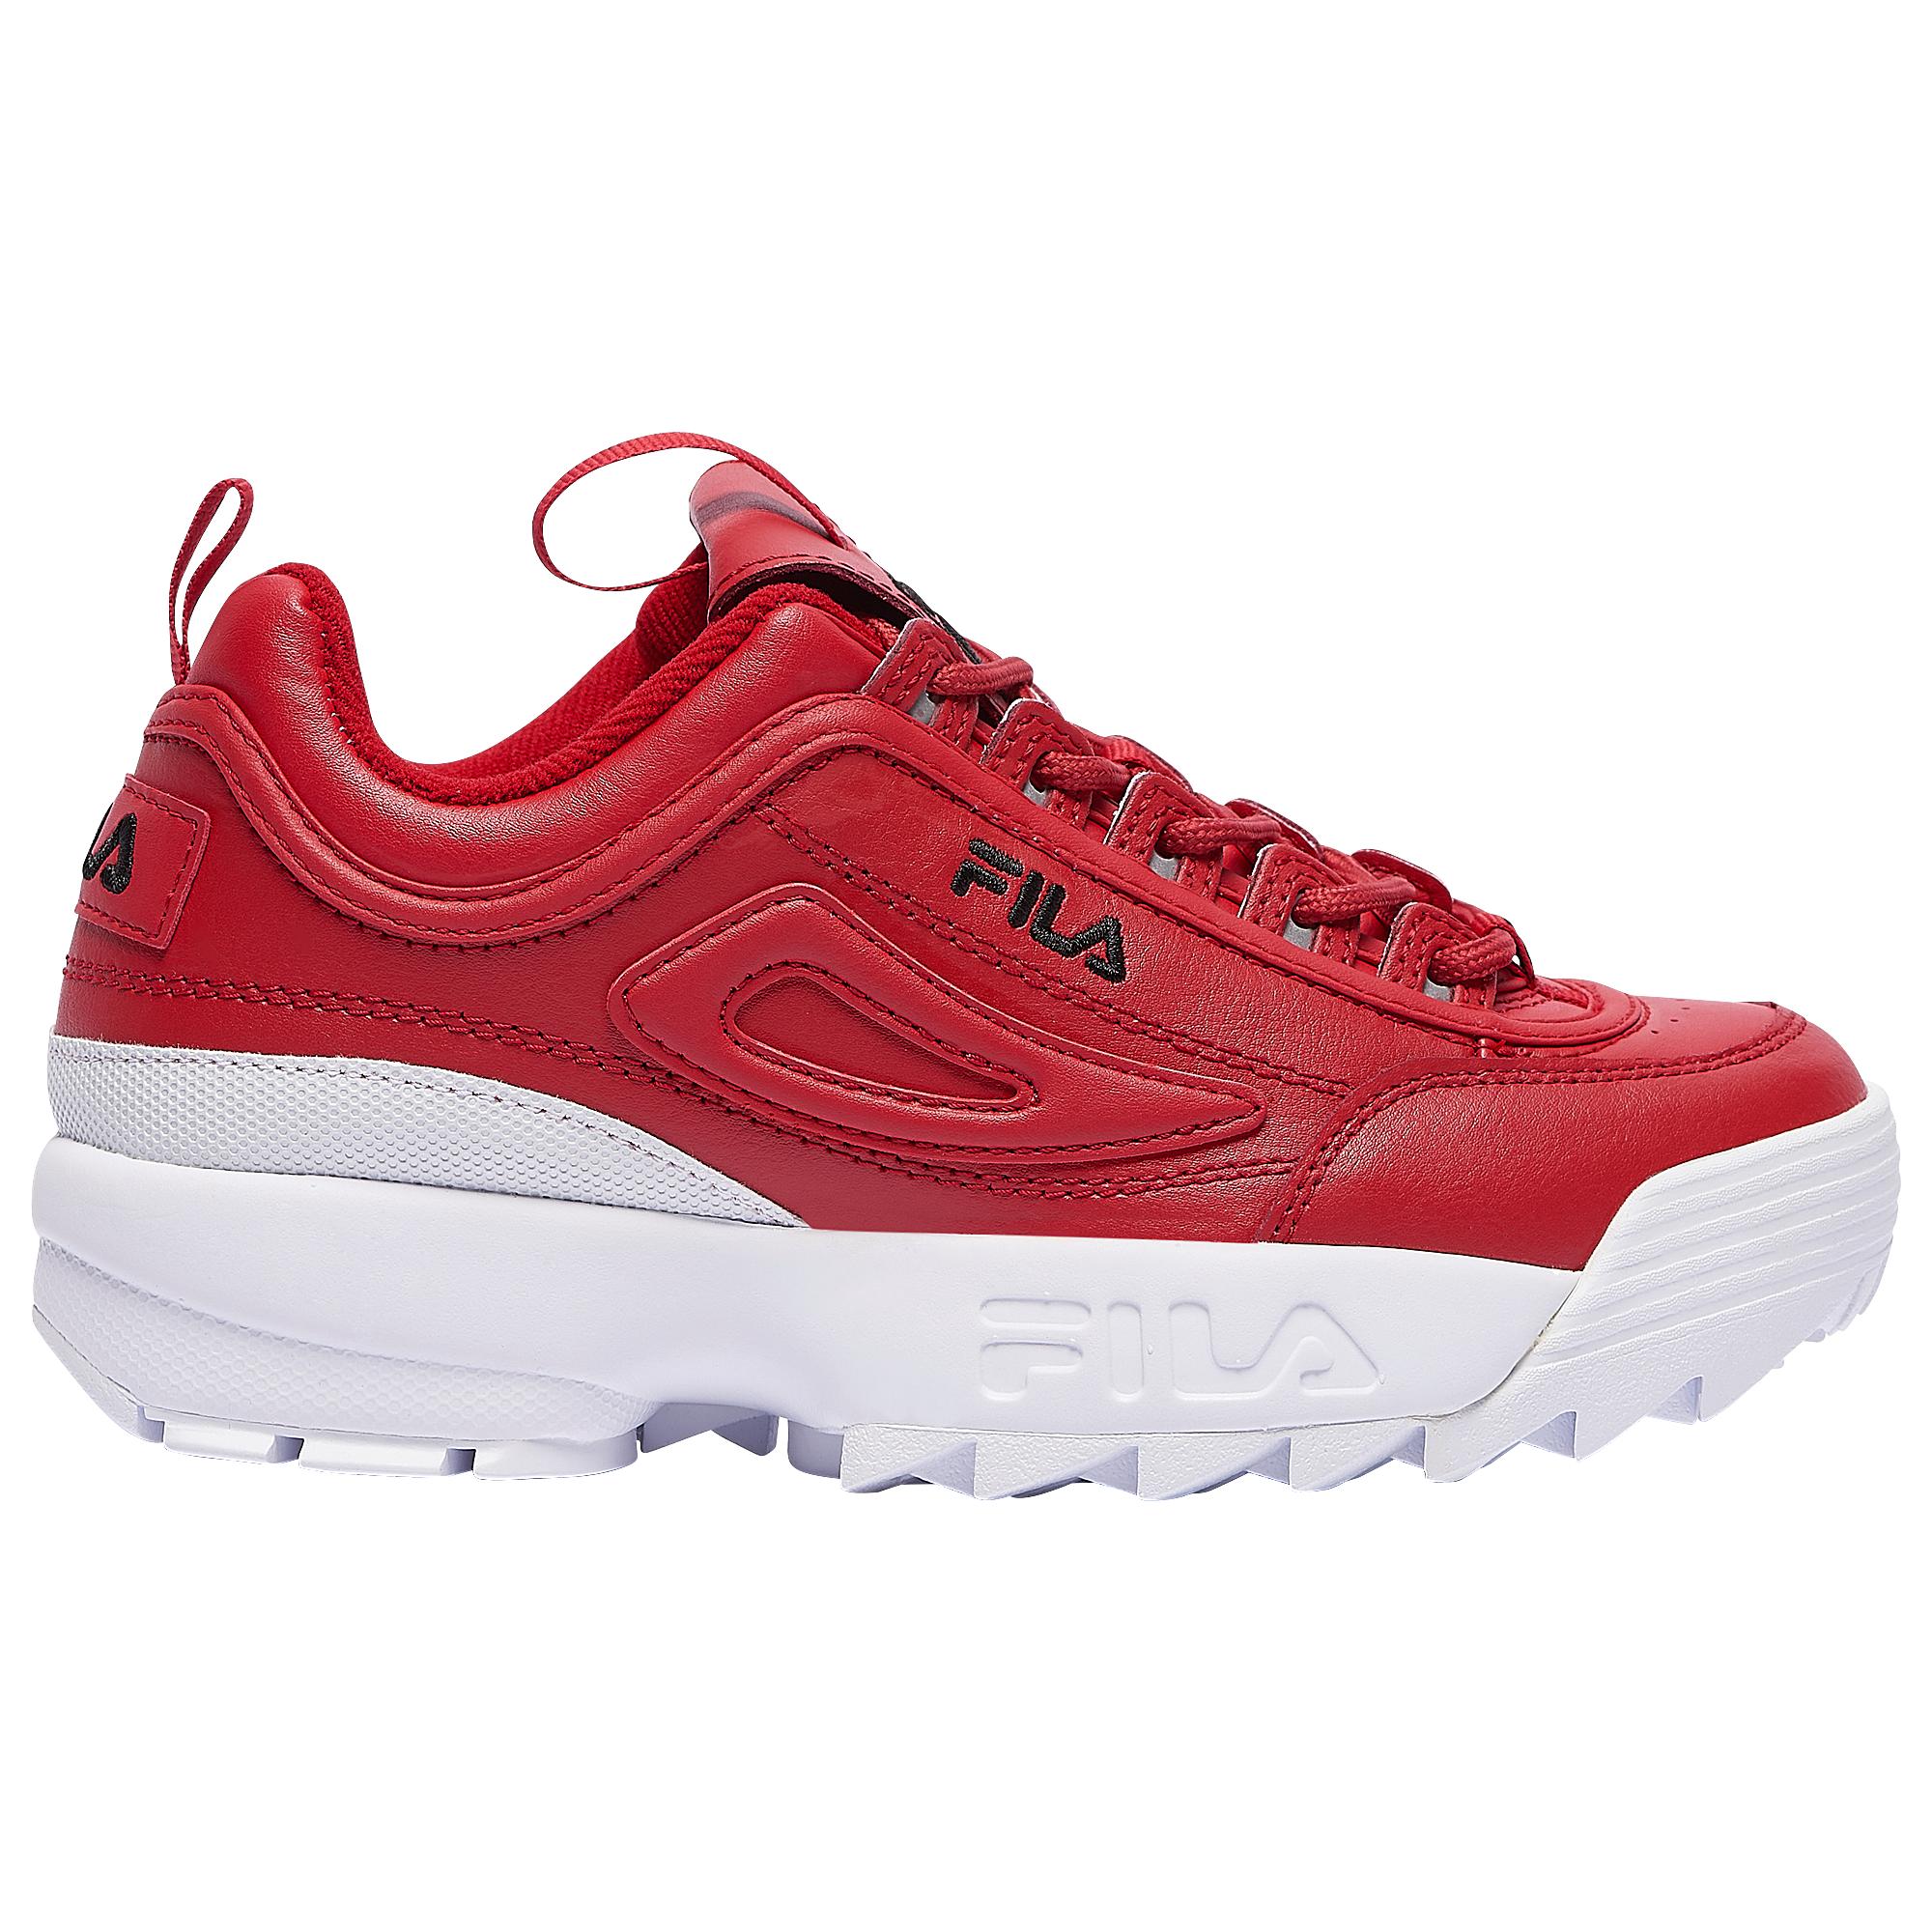 Fila Leather Disruptor 2 Premium in Red/Black/White (Red) - Save 32% - Lyst